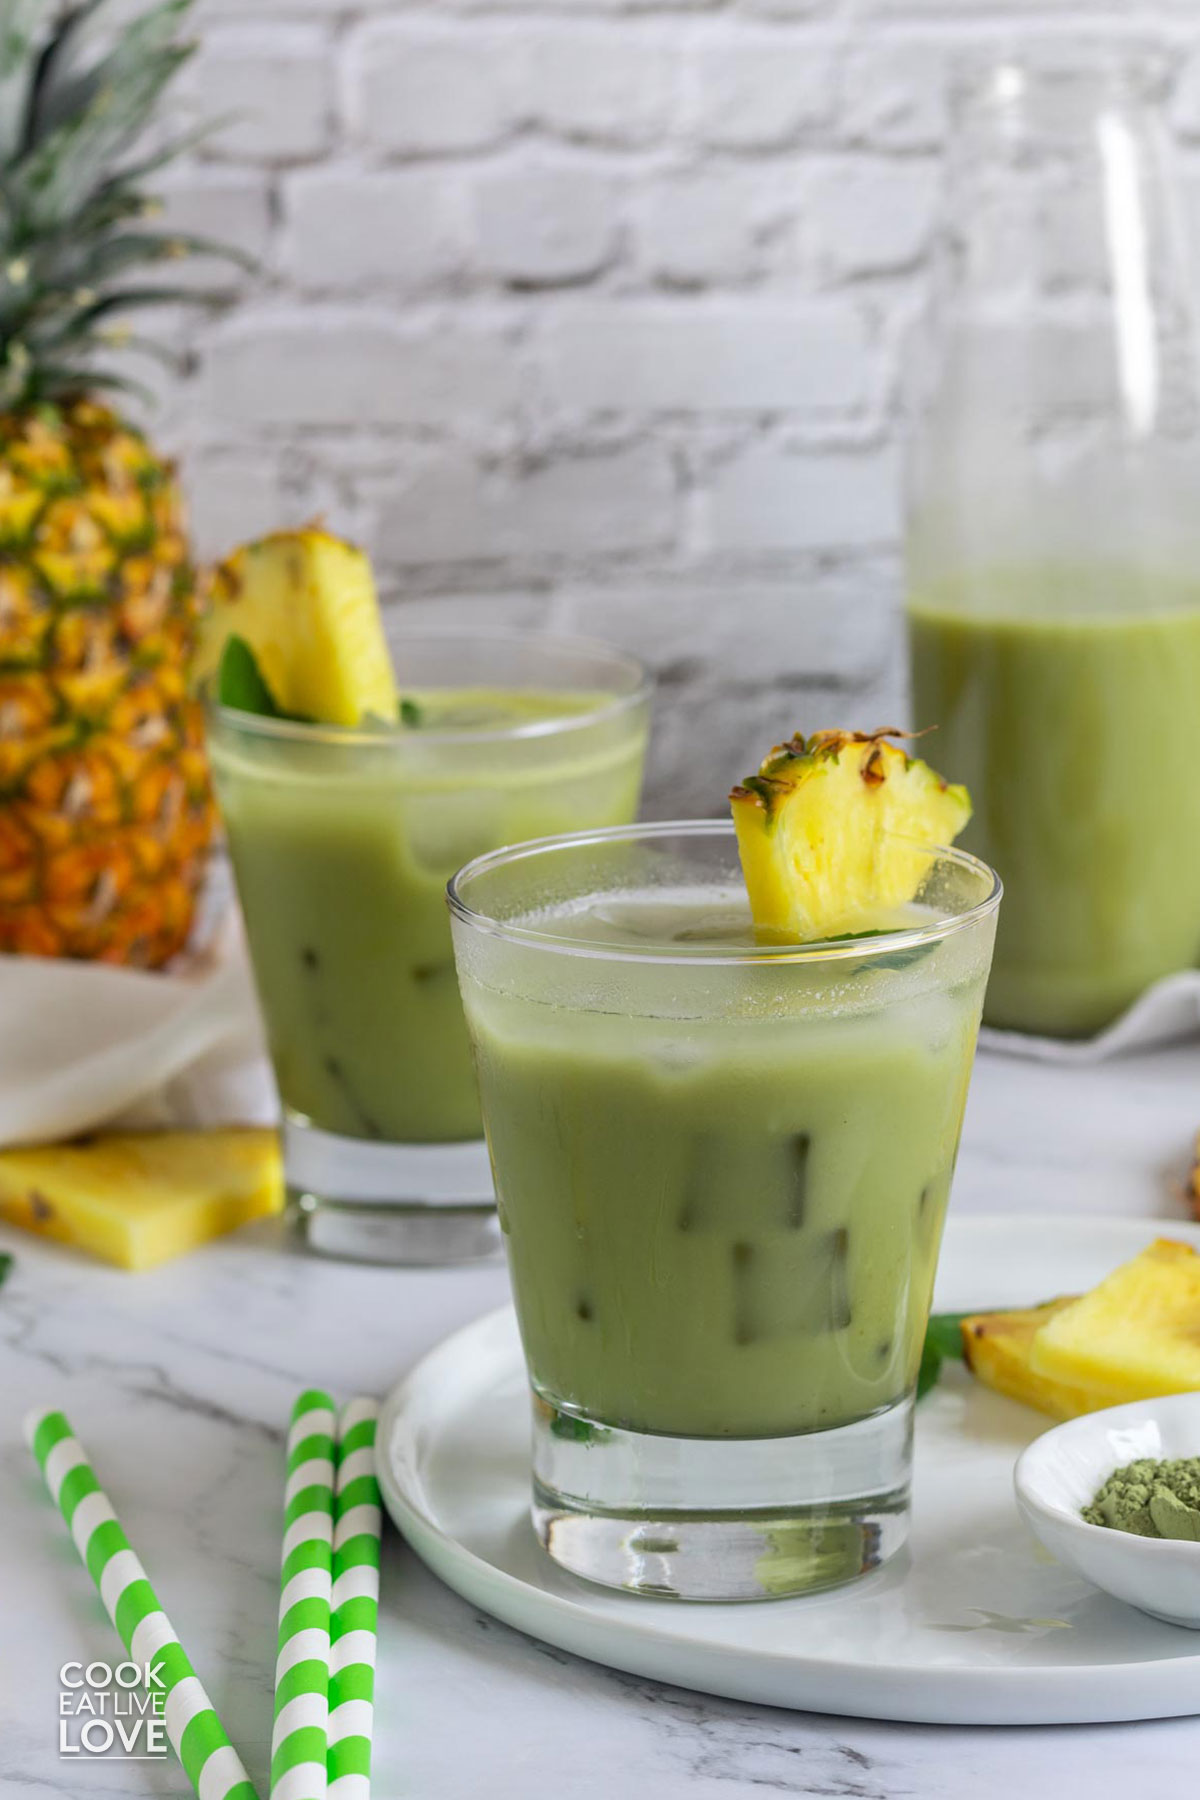 Glasses of pineapple matcha drink on the table with pineapple half.